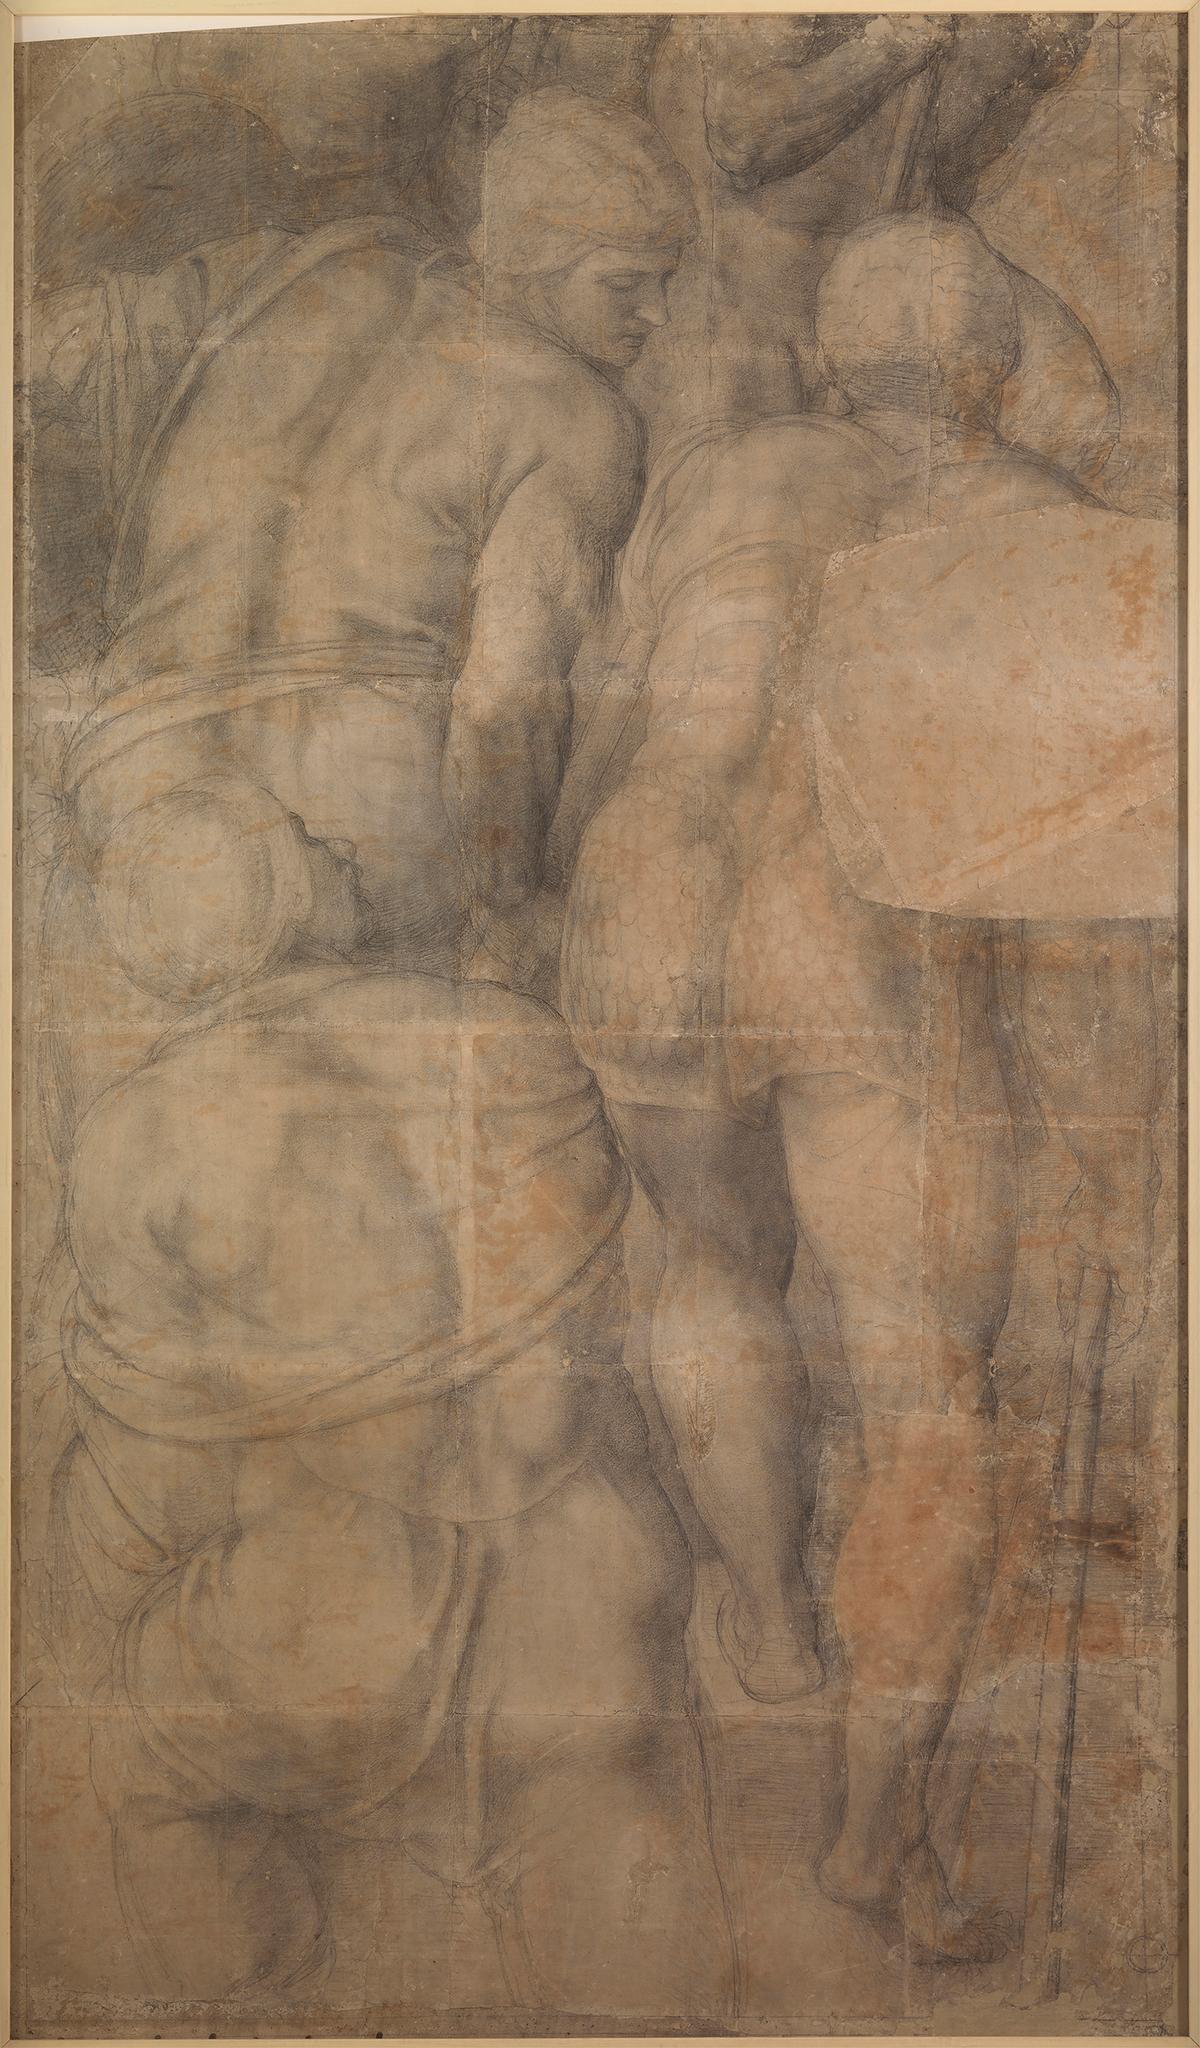 "Group of Soldiers," 1546–1550, by Michelangelo. Charcoal on paper, pricked for transfer; 103.5 by 61.4 inches. (Courtesy of the Louvre)